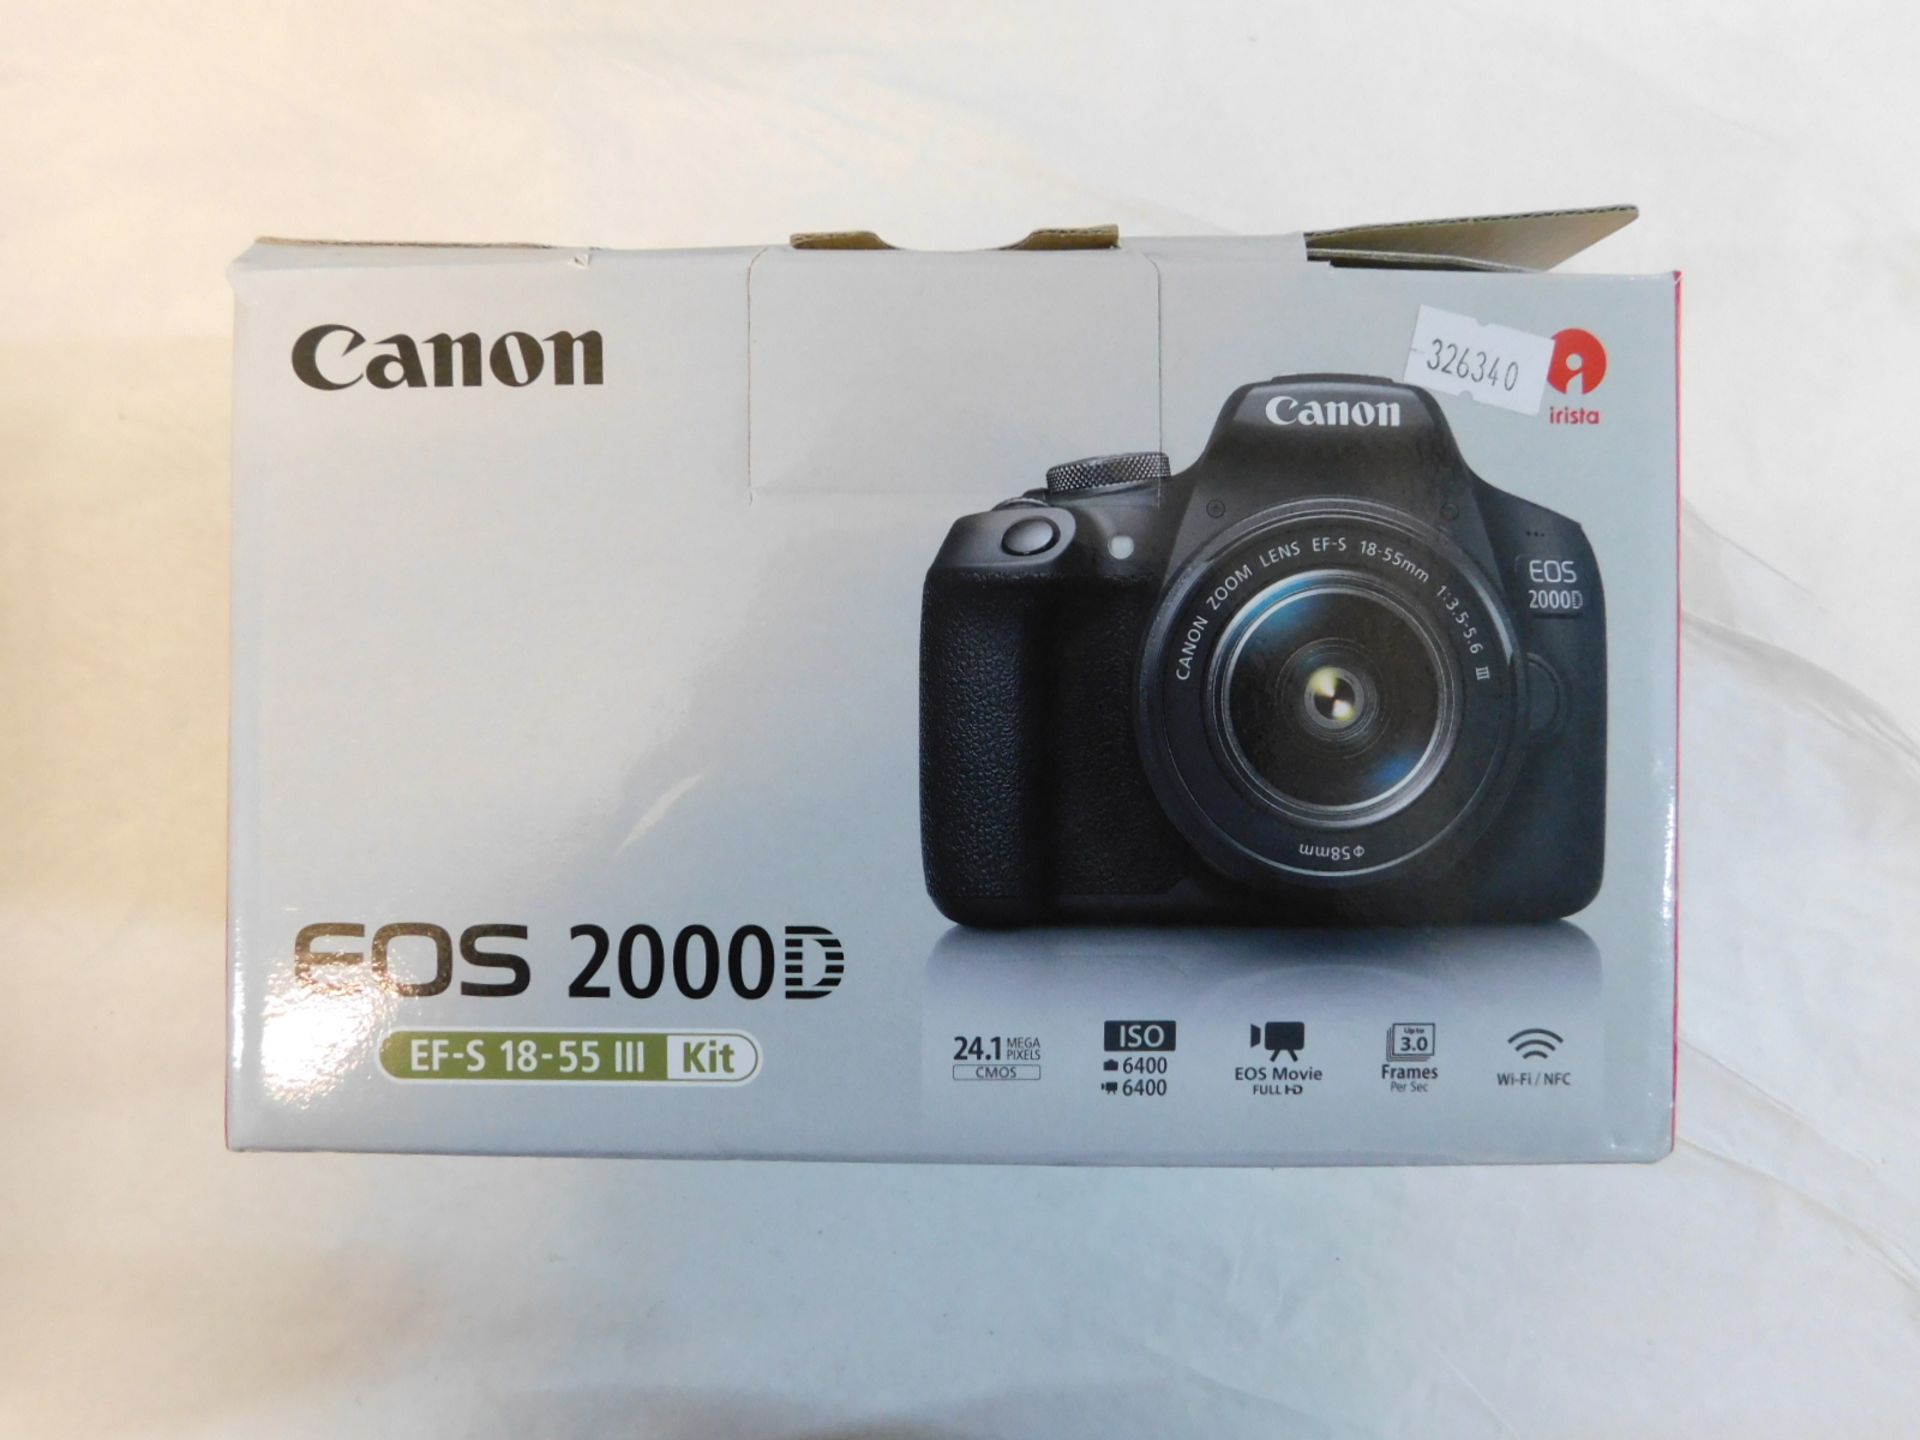 1 BOXED CANON 2000D DSLR CAMERA KIT COMES WITH 18-55MM LENS RRP Â£499.99